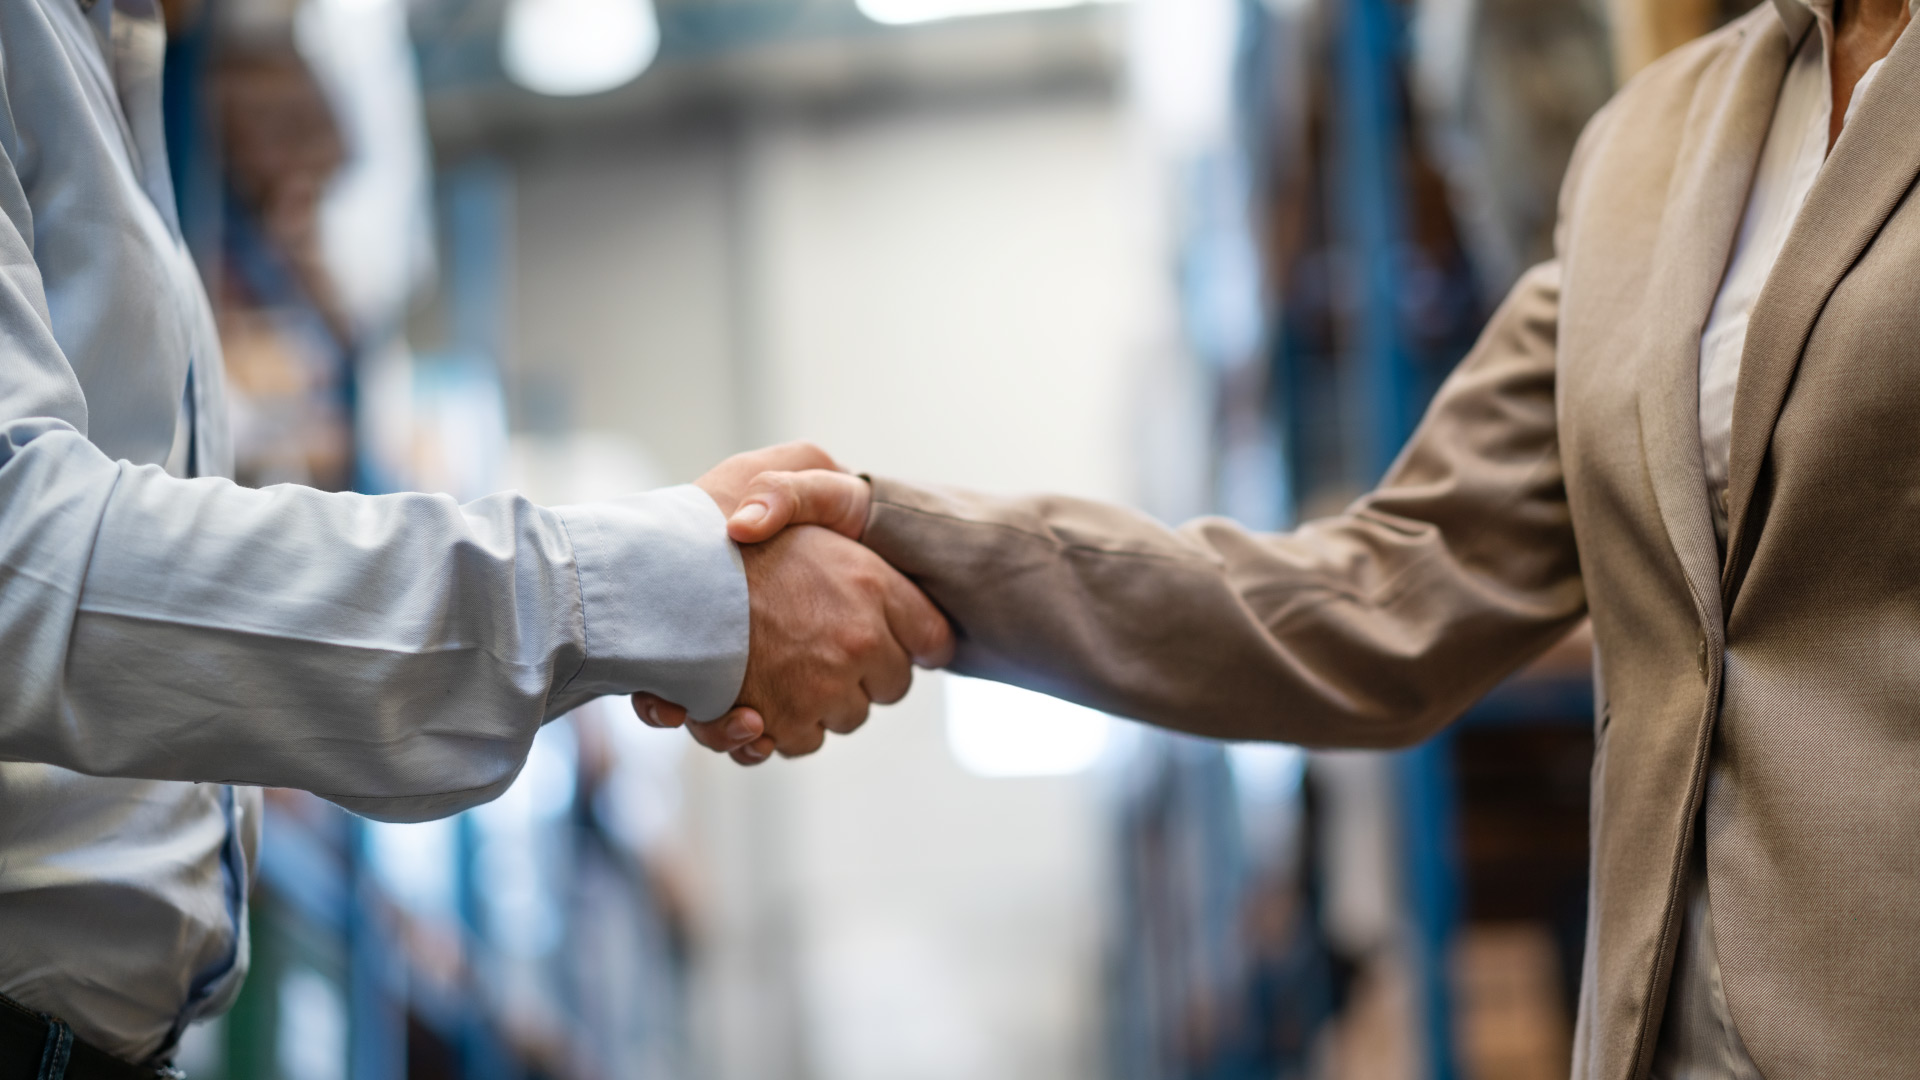 Shaking hands in a warehouse